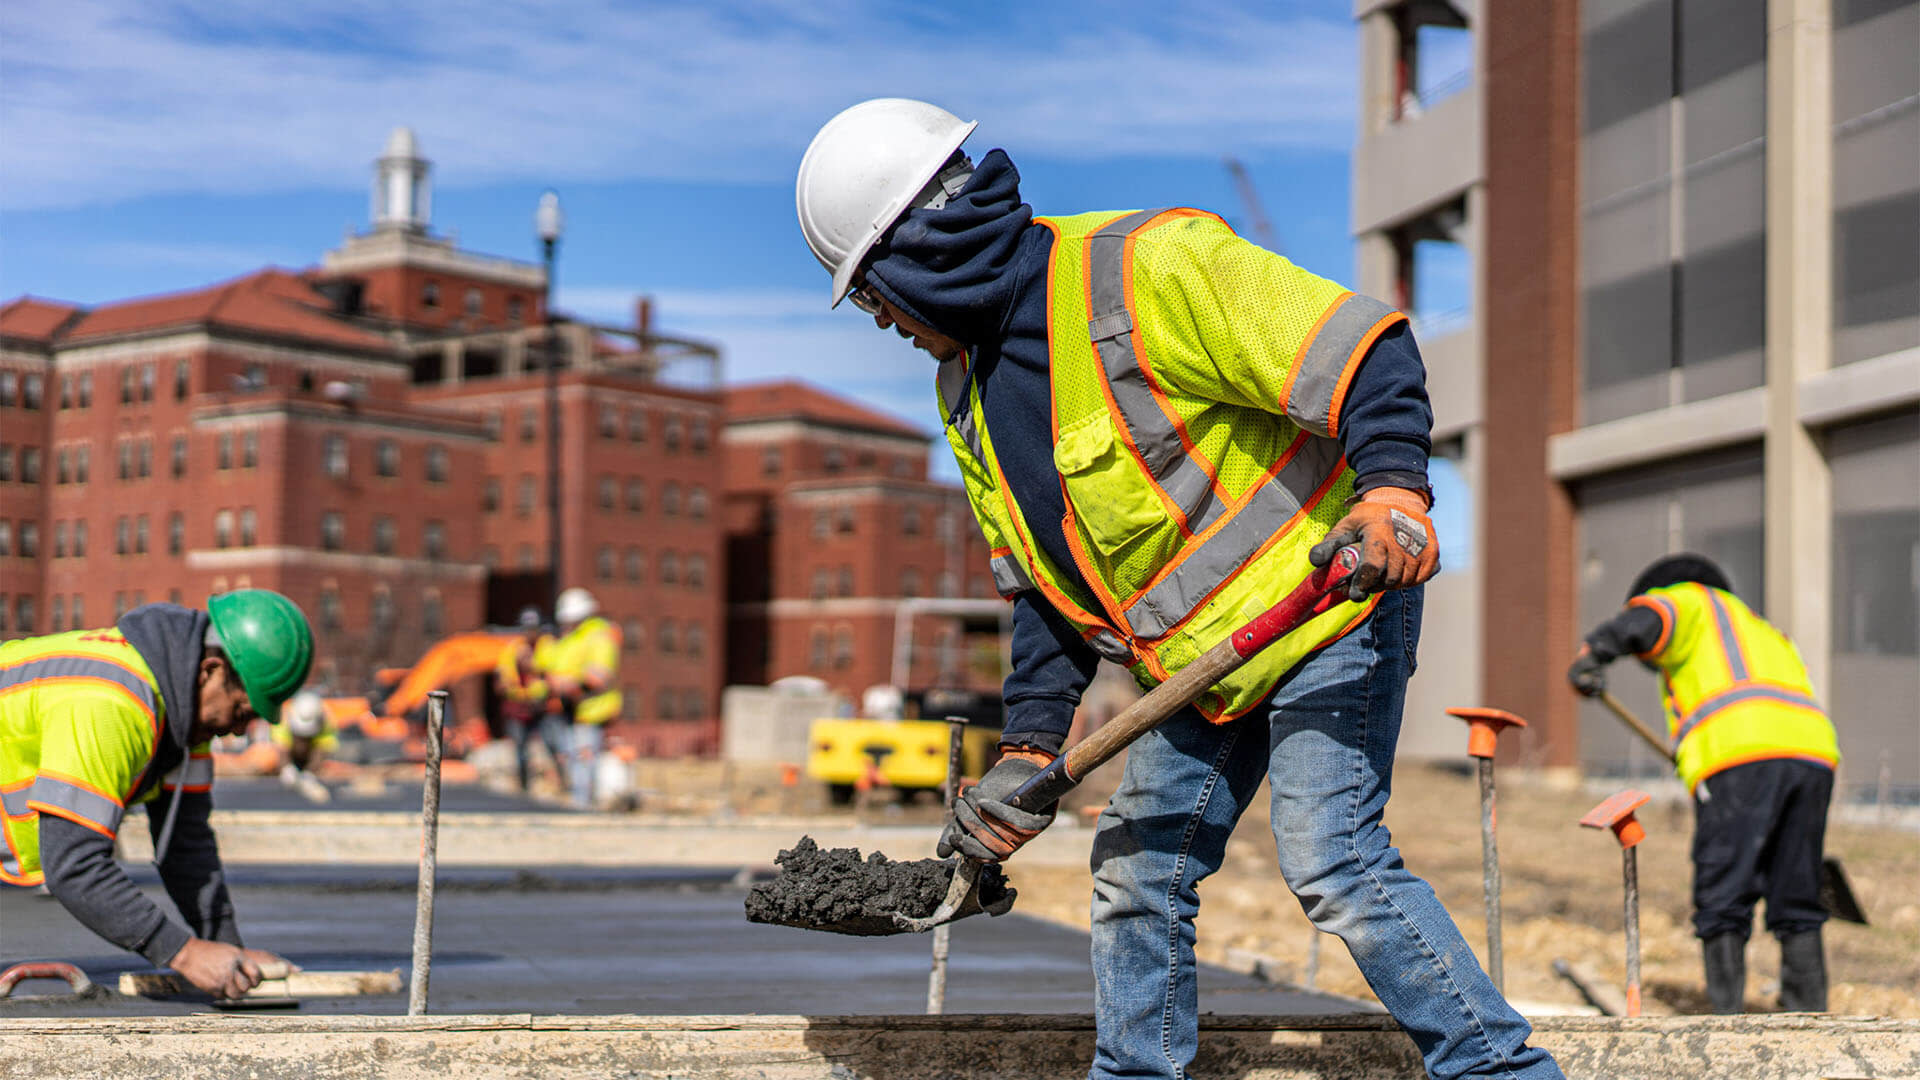 A man in a safety vest and helmet using a shovel to flatten cement